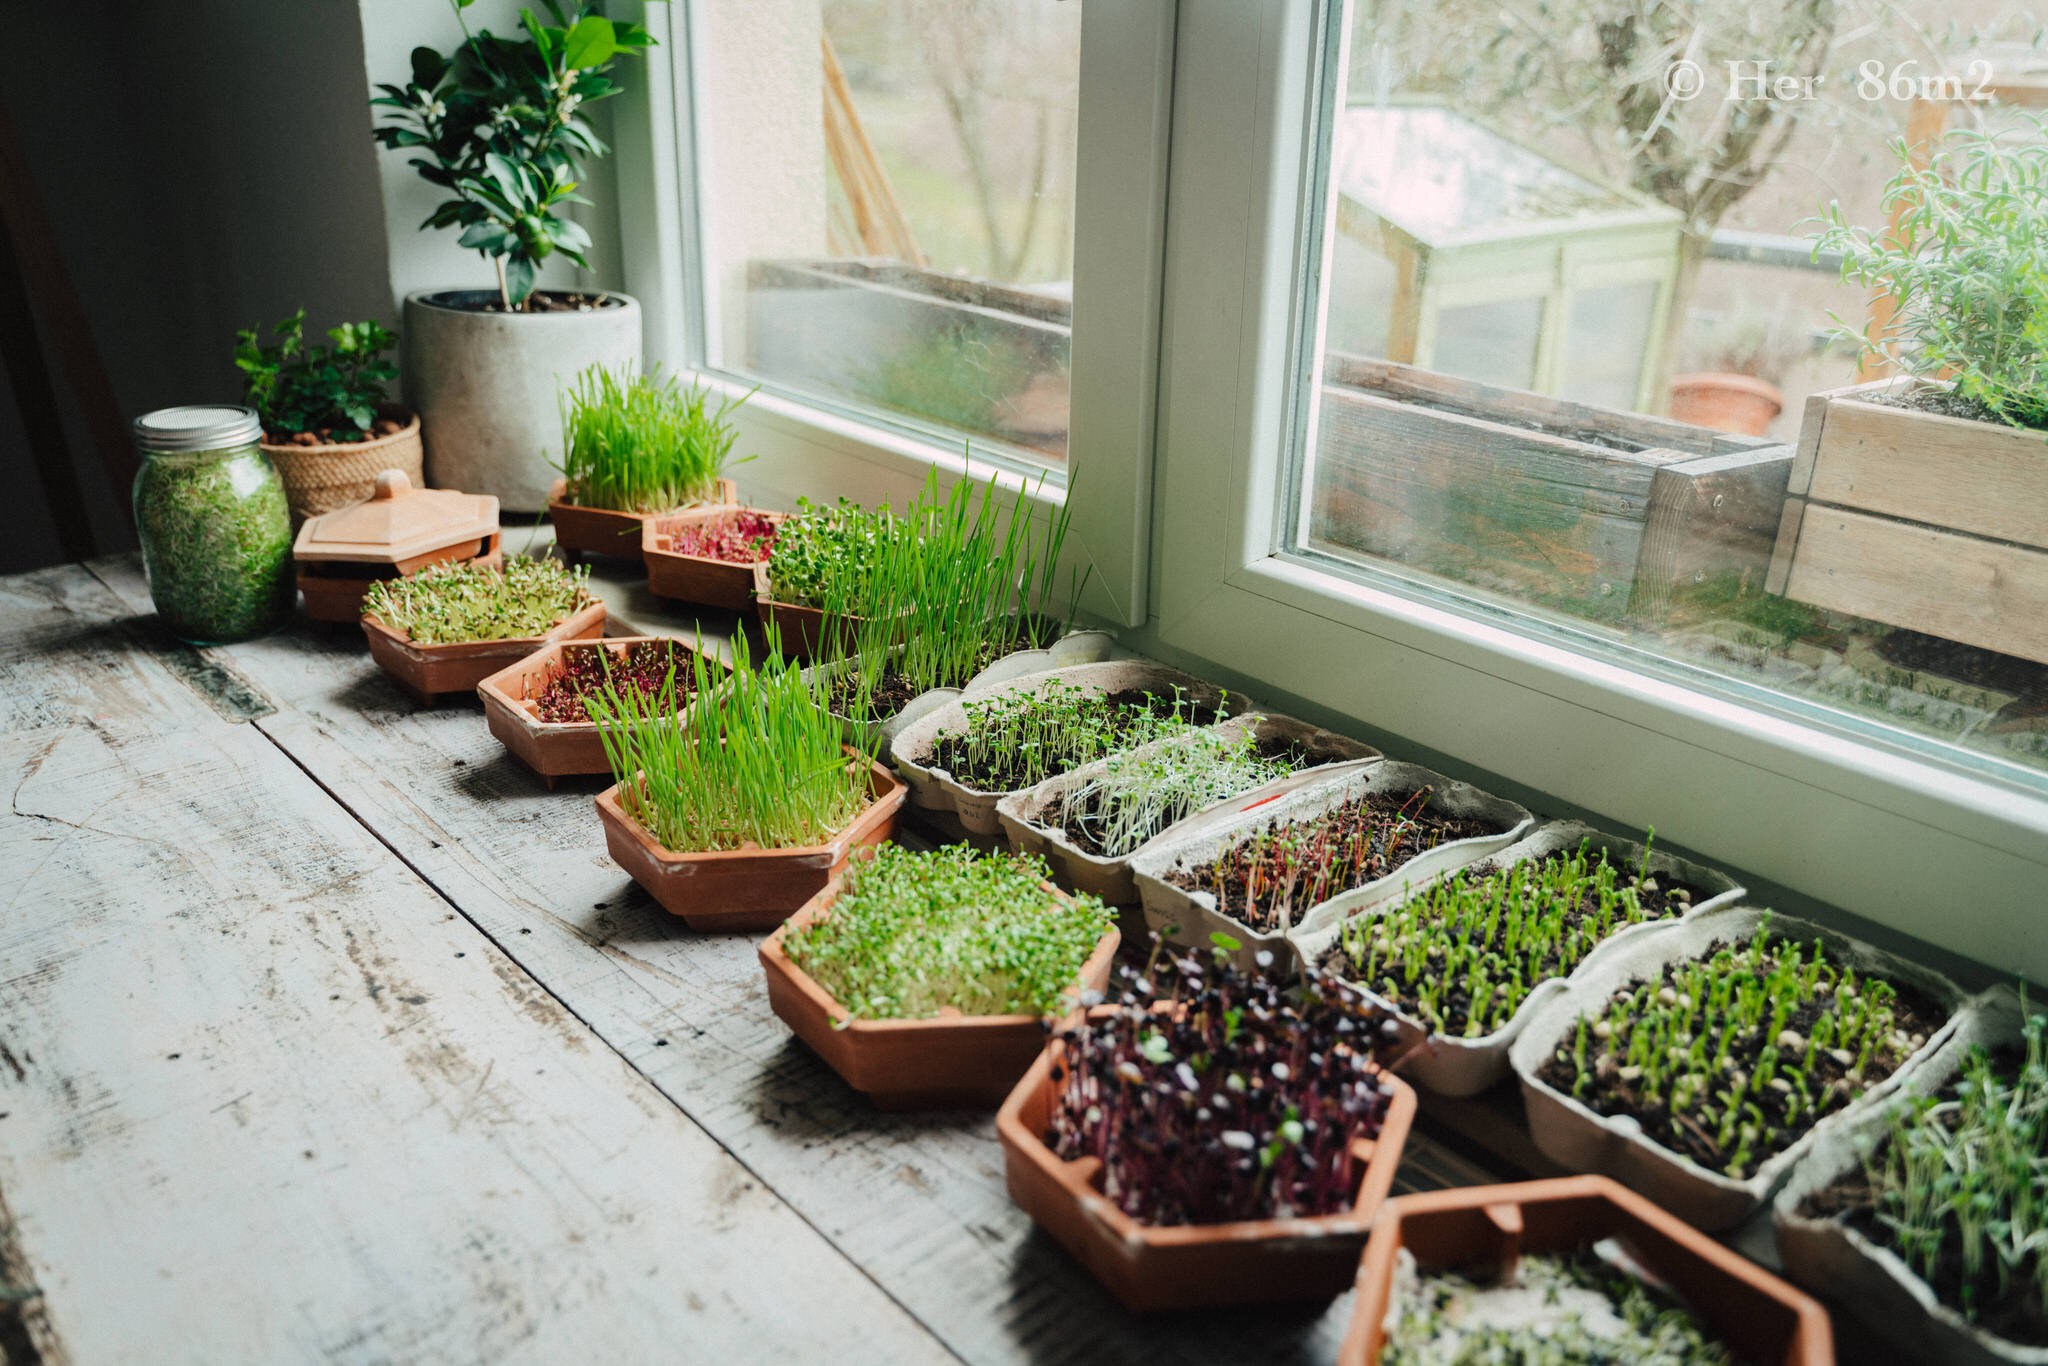 Grow Vegetables Indoors - Microgreens & Sprouts - From Seed to Harvest 22.JPG